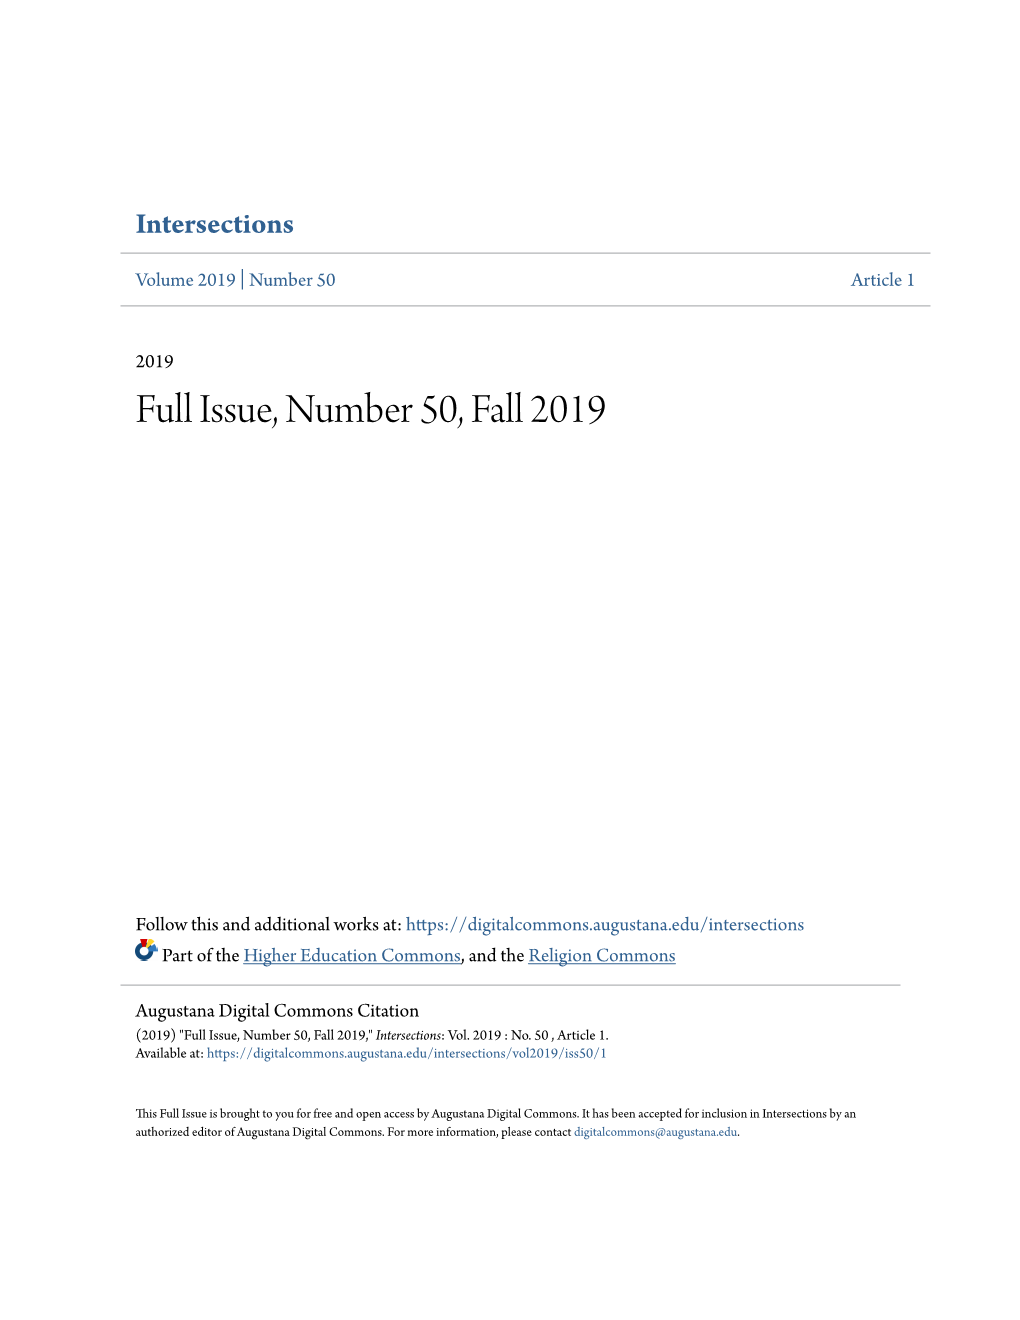 Full Issue, Number 50, Fall 2019